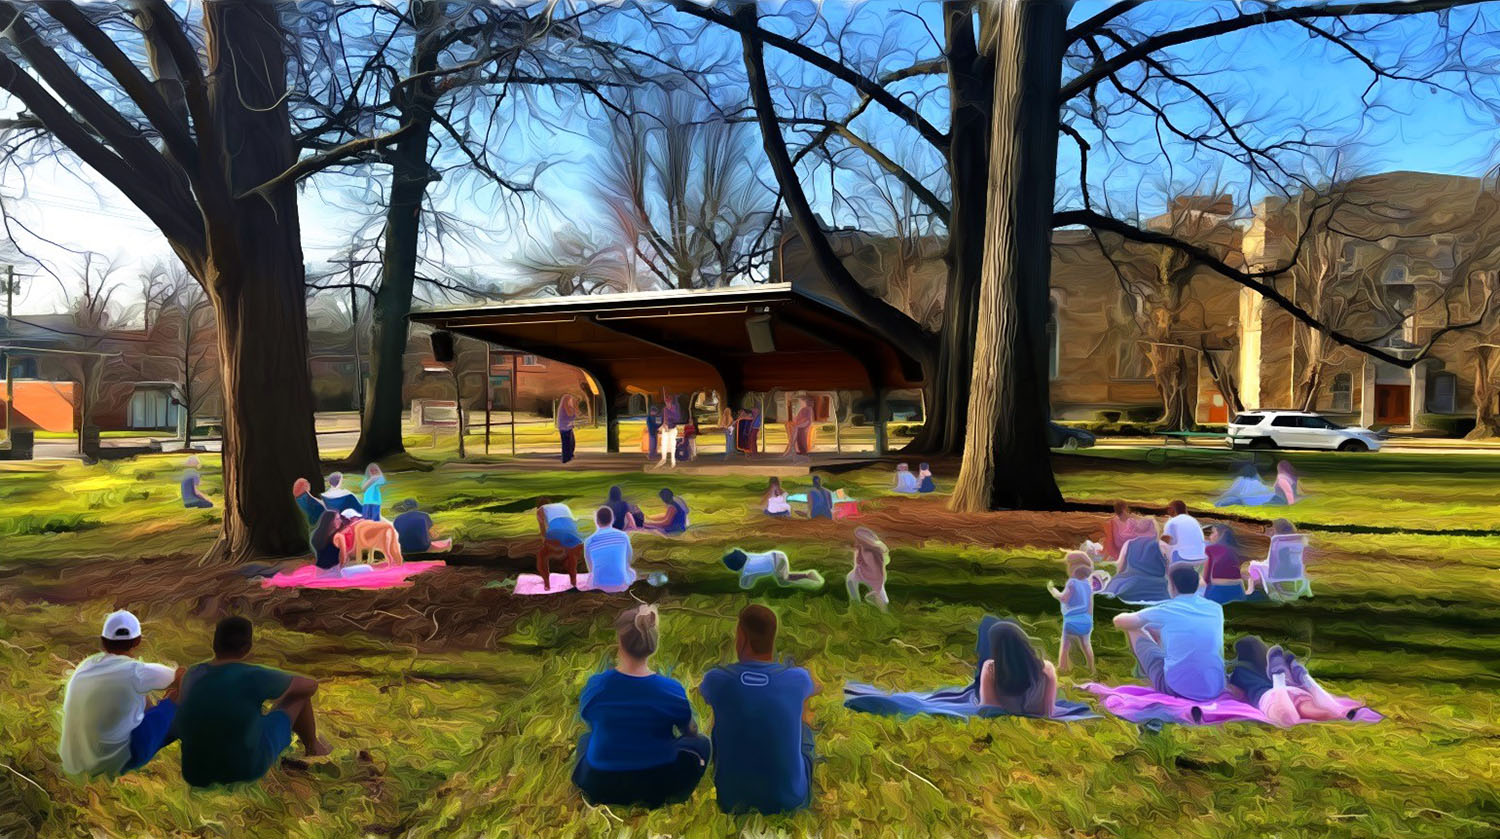 artist rendering of what park can become